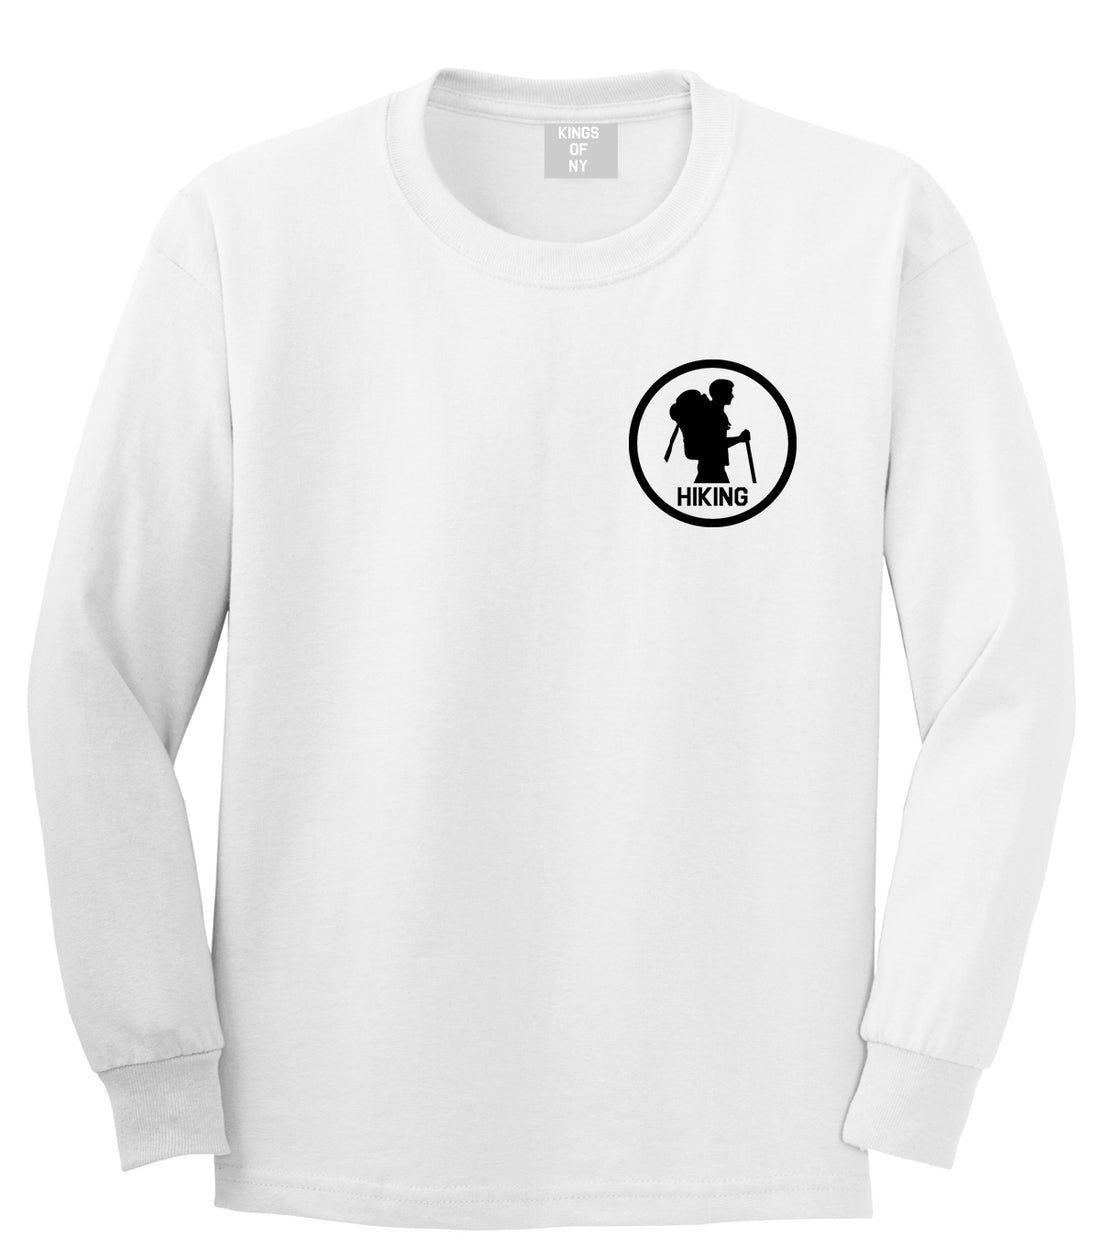 Backpacking Outdoor Hiking Chest White Long Sleeve T-Shirt by Kings Of NY